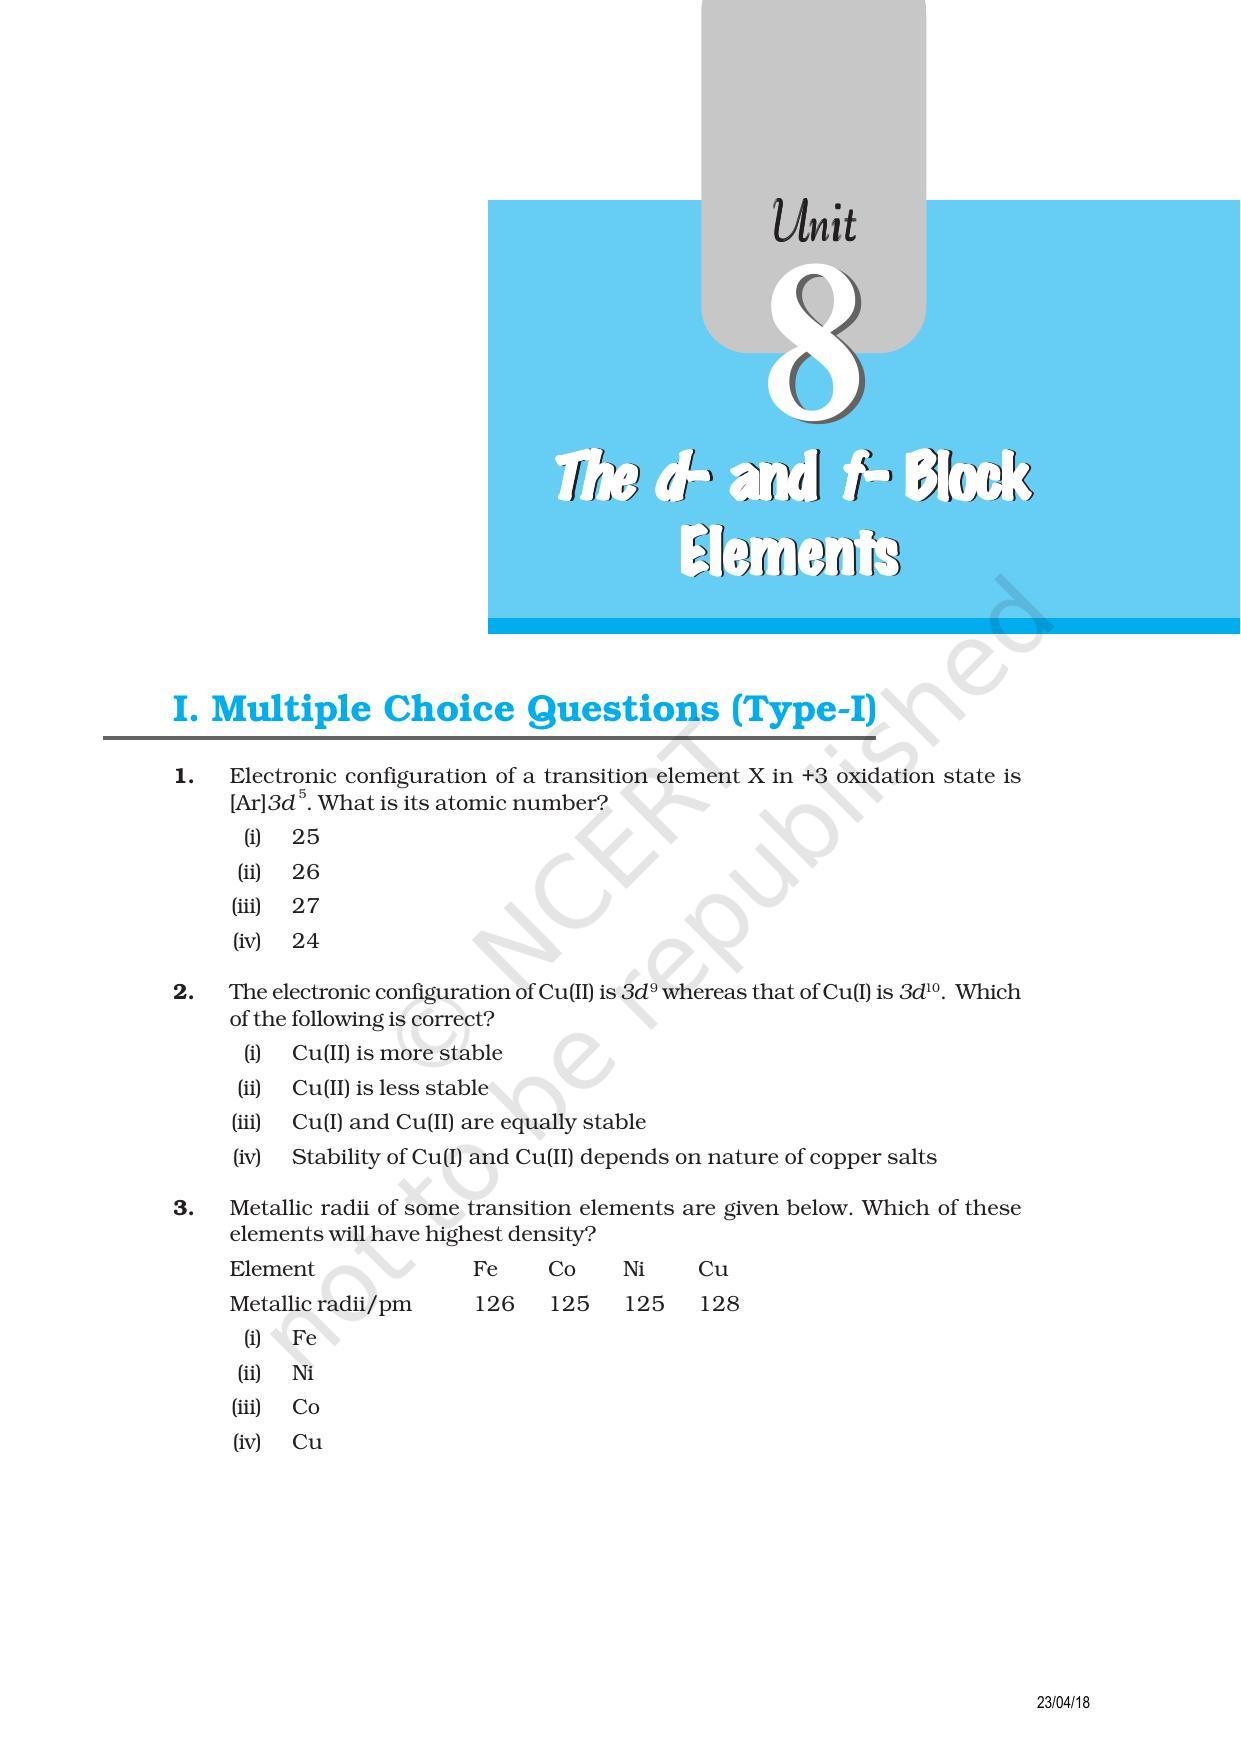 NCERT Exemplar Book for Class 12 Chemistry: Chapter 8 The d- and f- Block Elements - Page 1